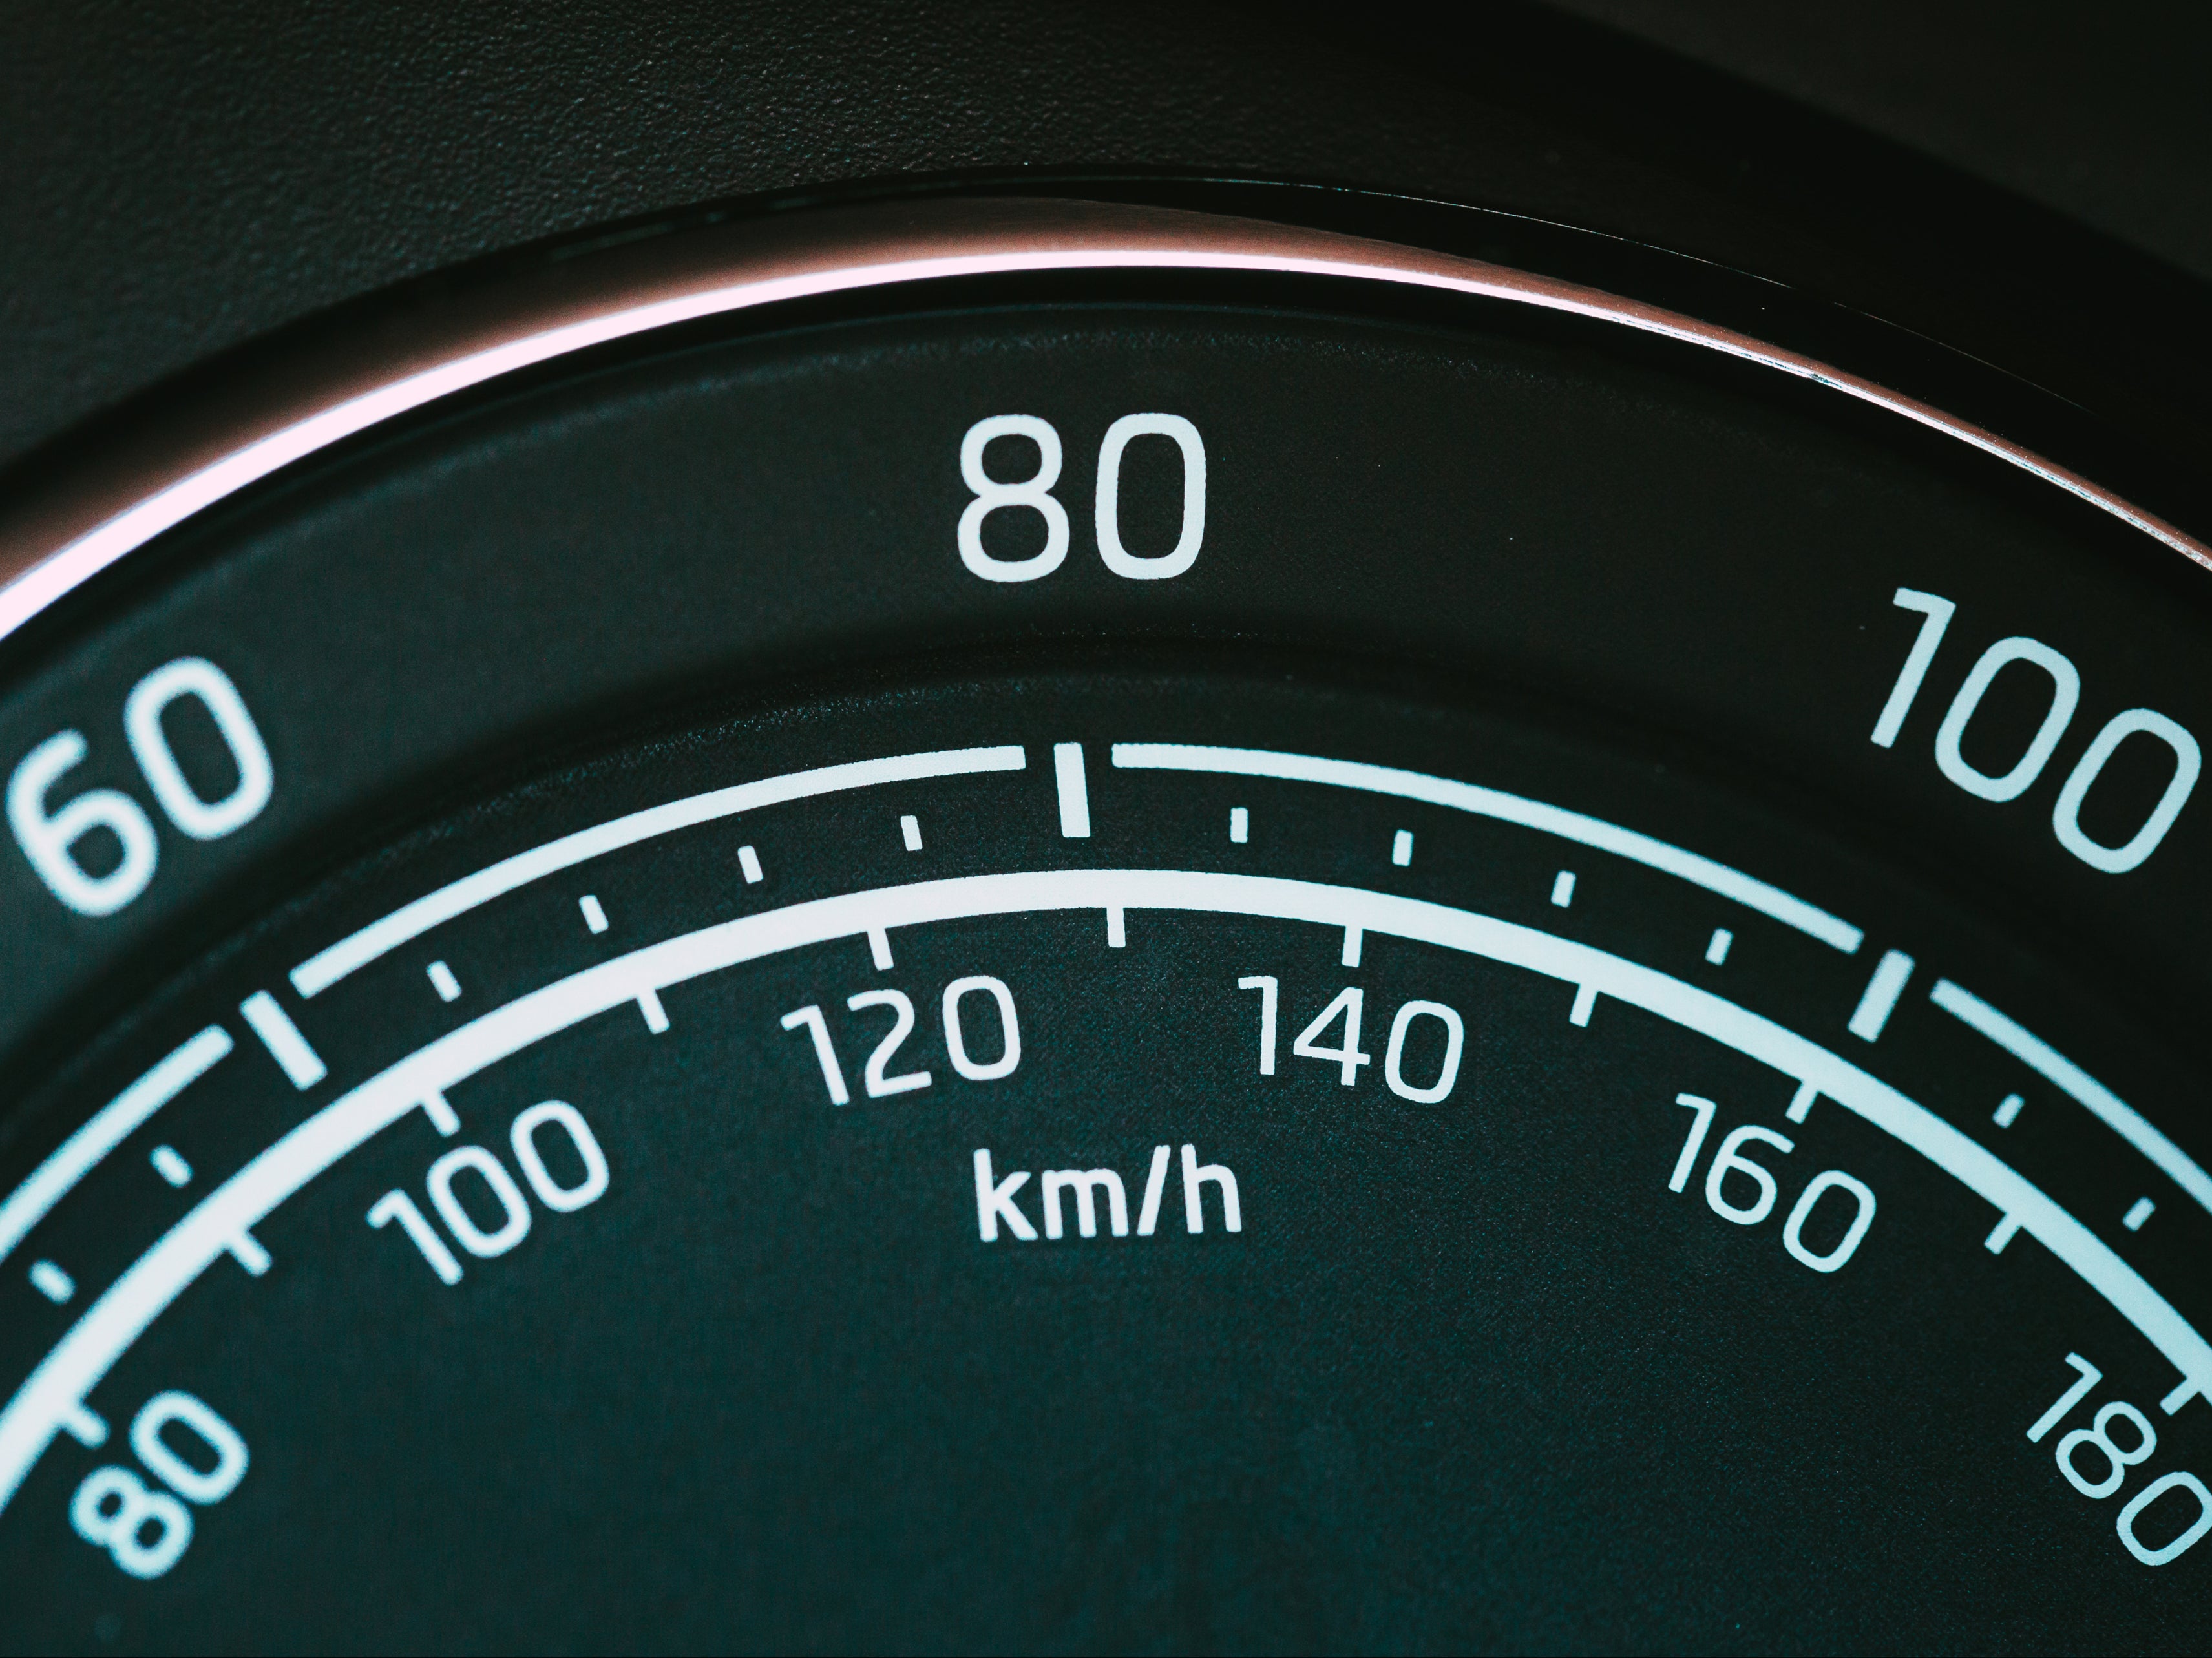 A new EU law on speed limiters is set to arrive in Britain